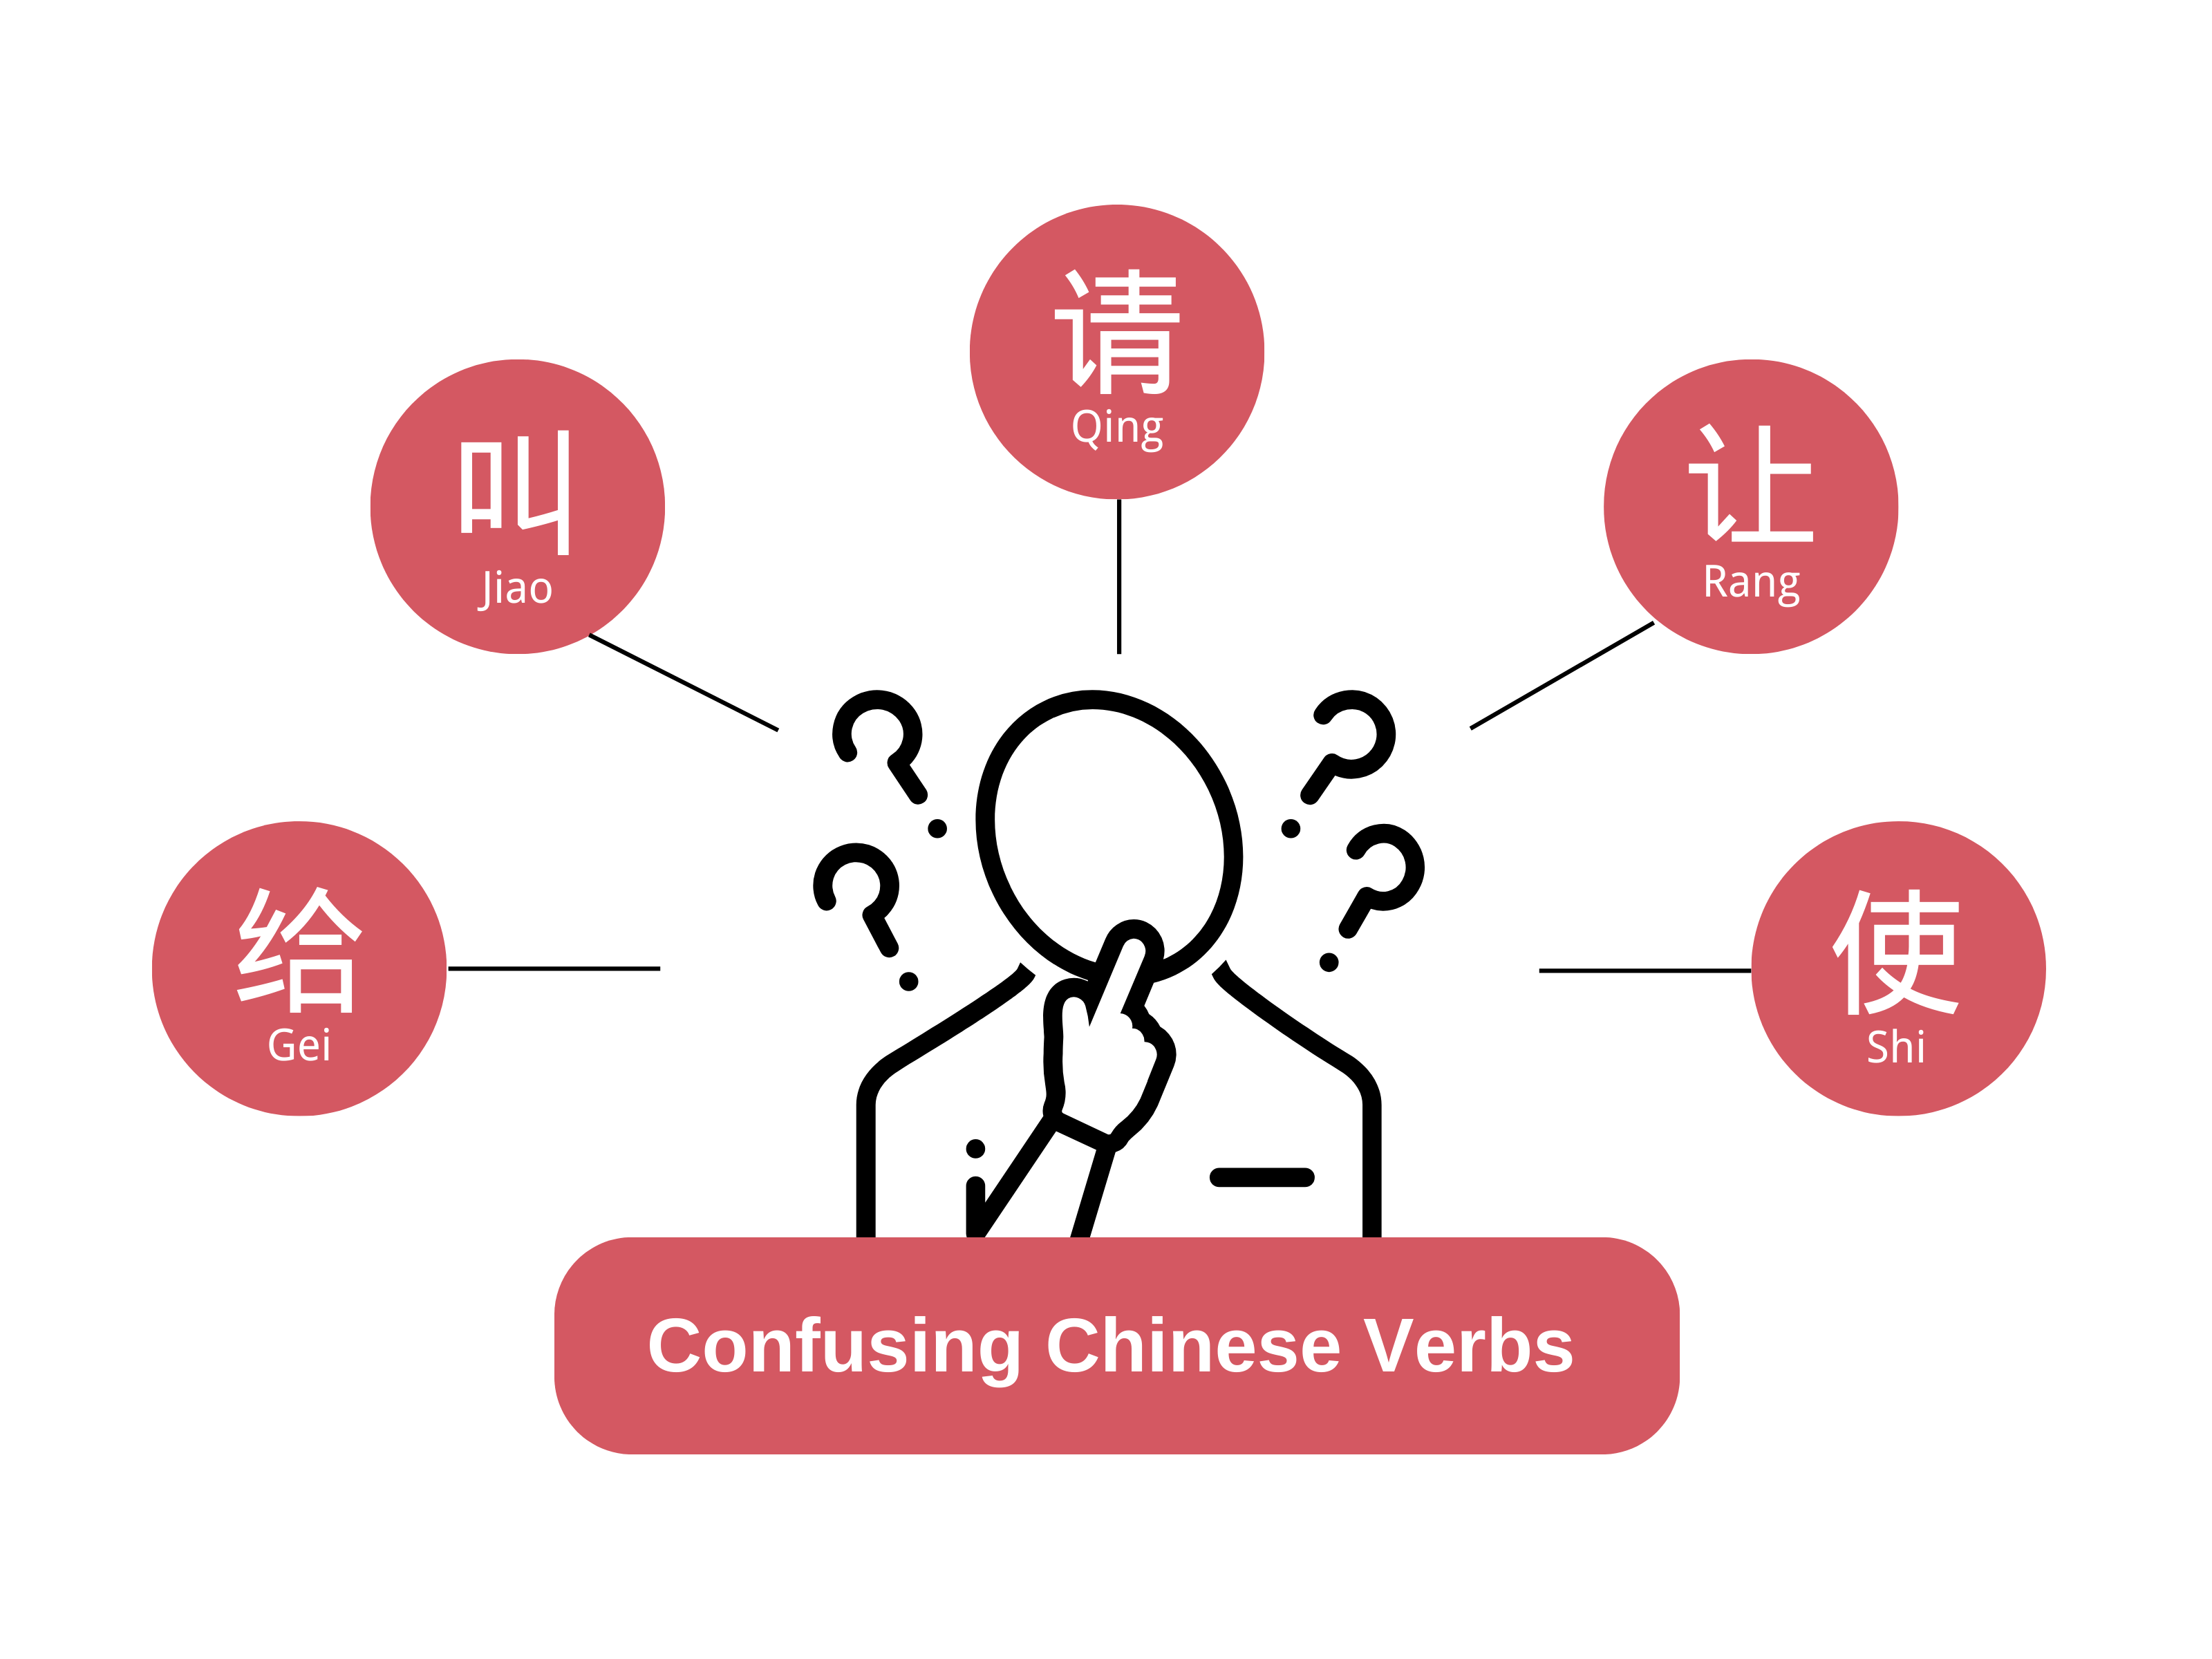  Meanings and Categories of Confusing Chinese Verbs “Gei (给)”  “Jiao (叫)” “Qing (请)” “Rang (让)” “Shi (使)”: A Semantic Analysis